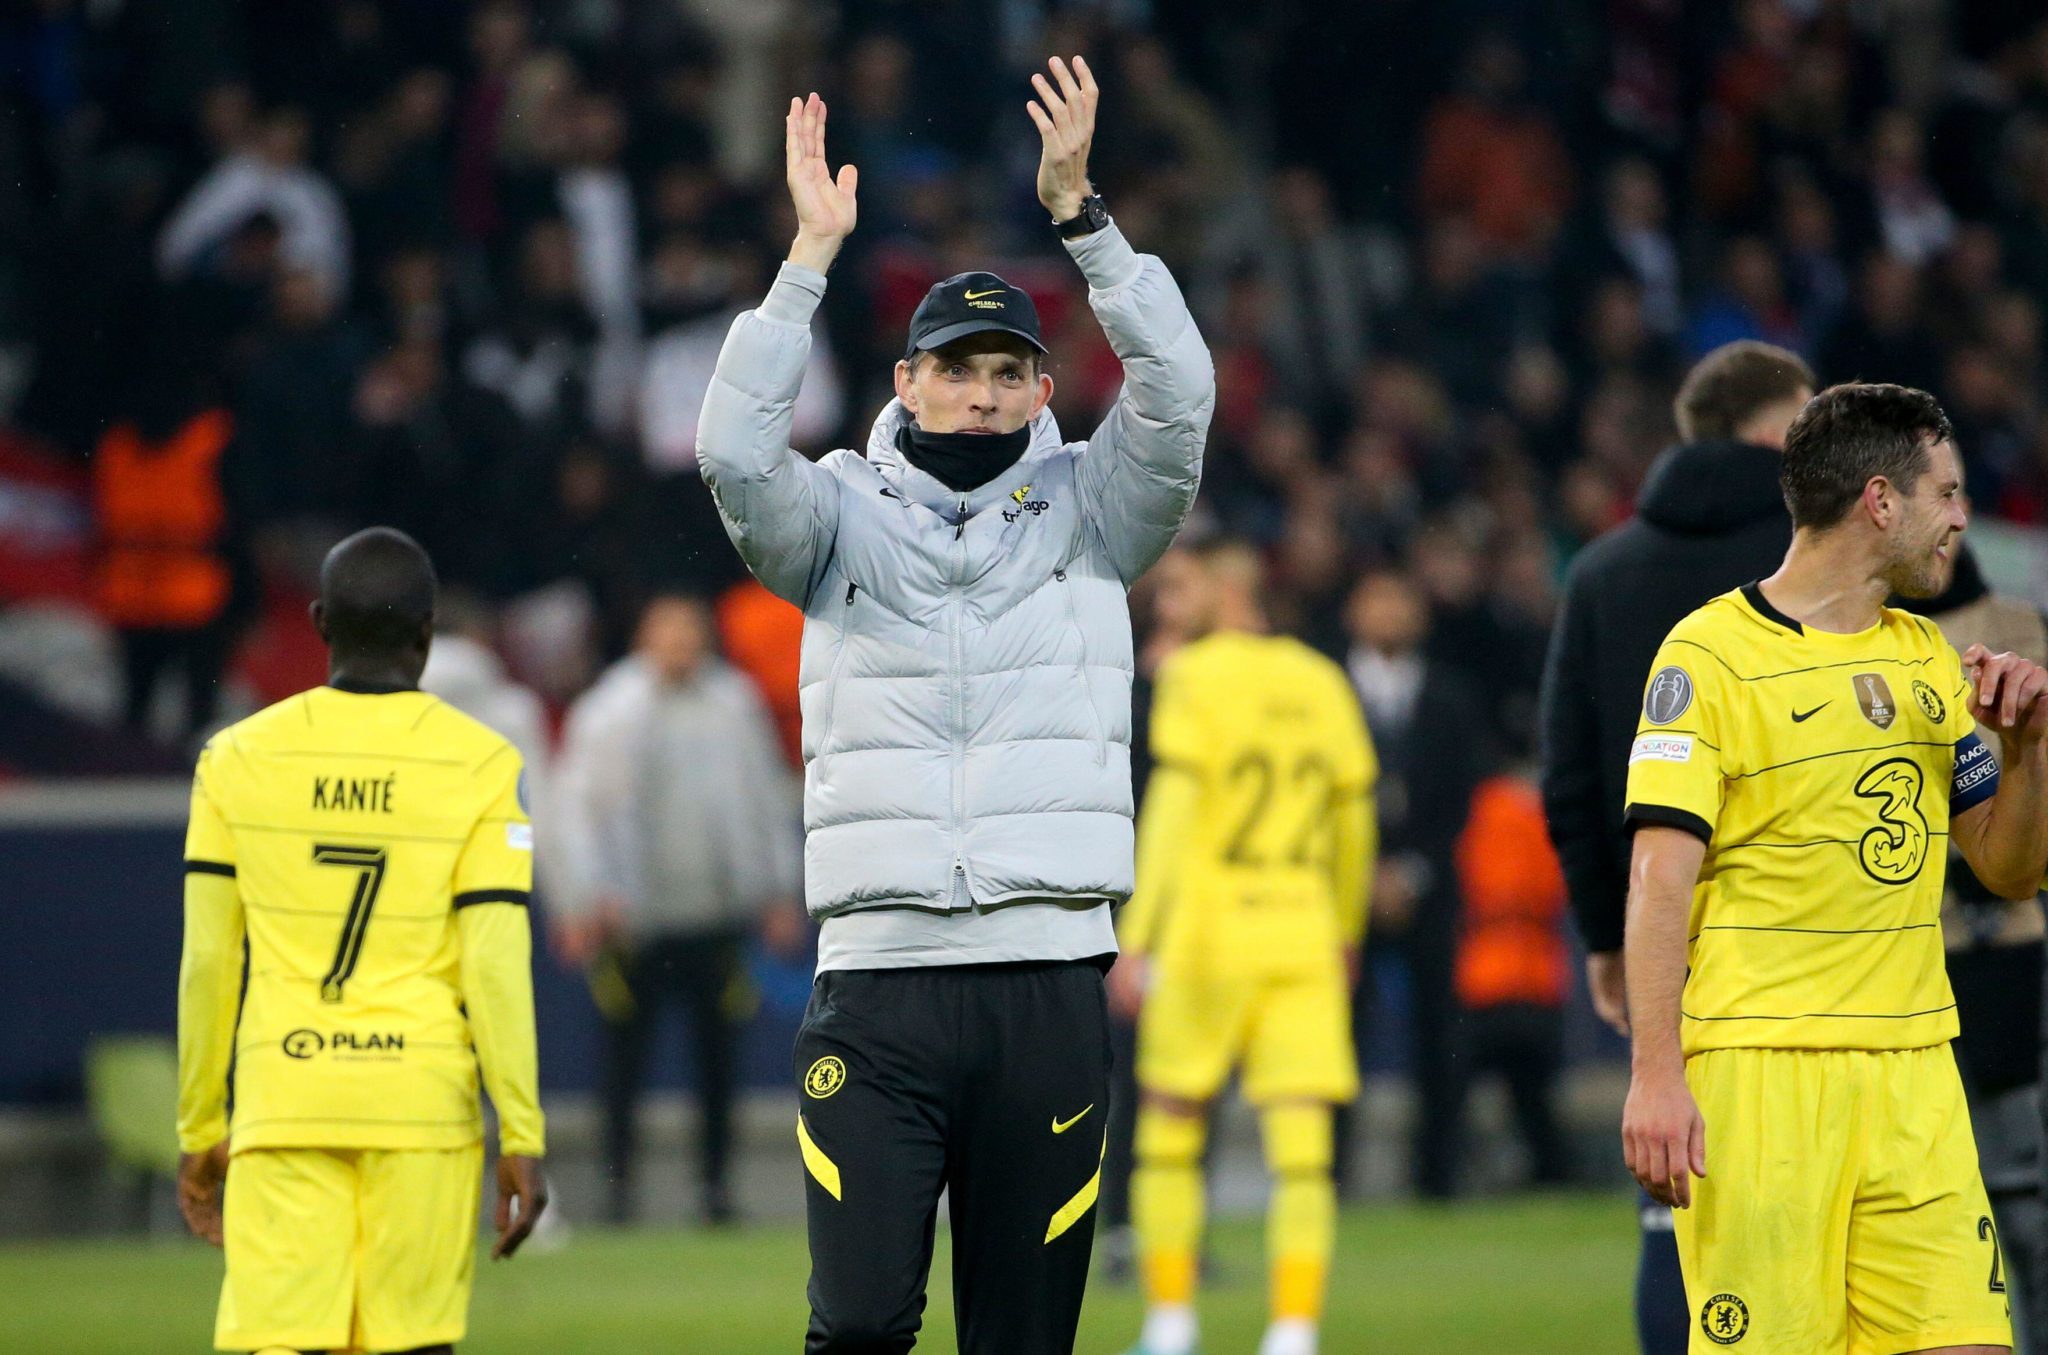 Thomas Tuchel applauds the fans after Chelsea progress in the Champions League against Lille